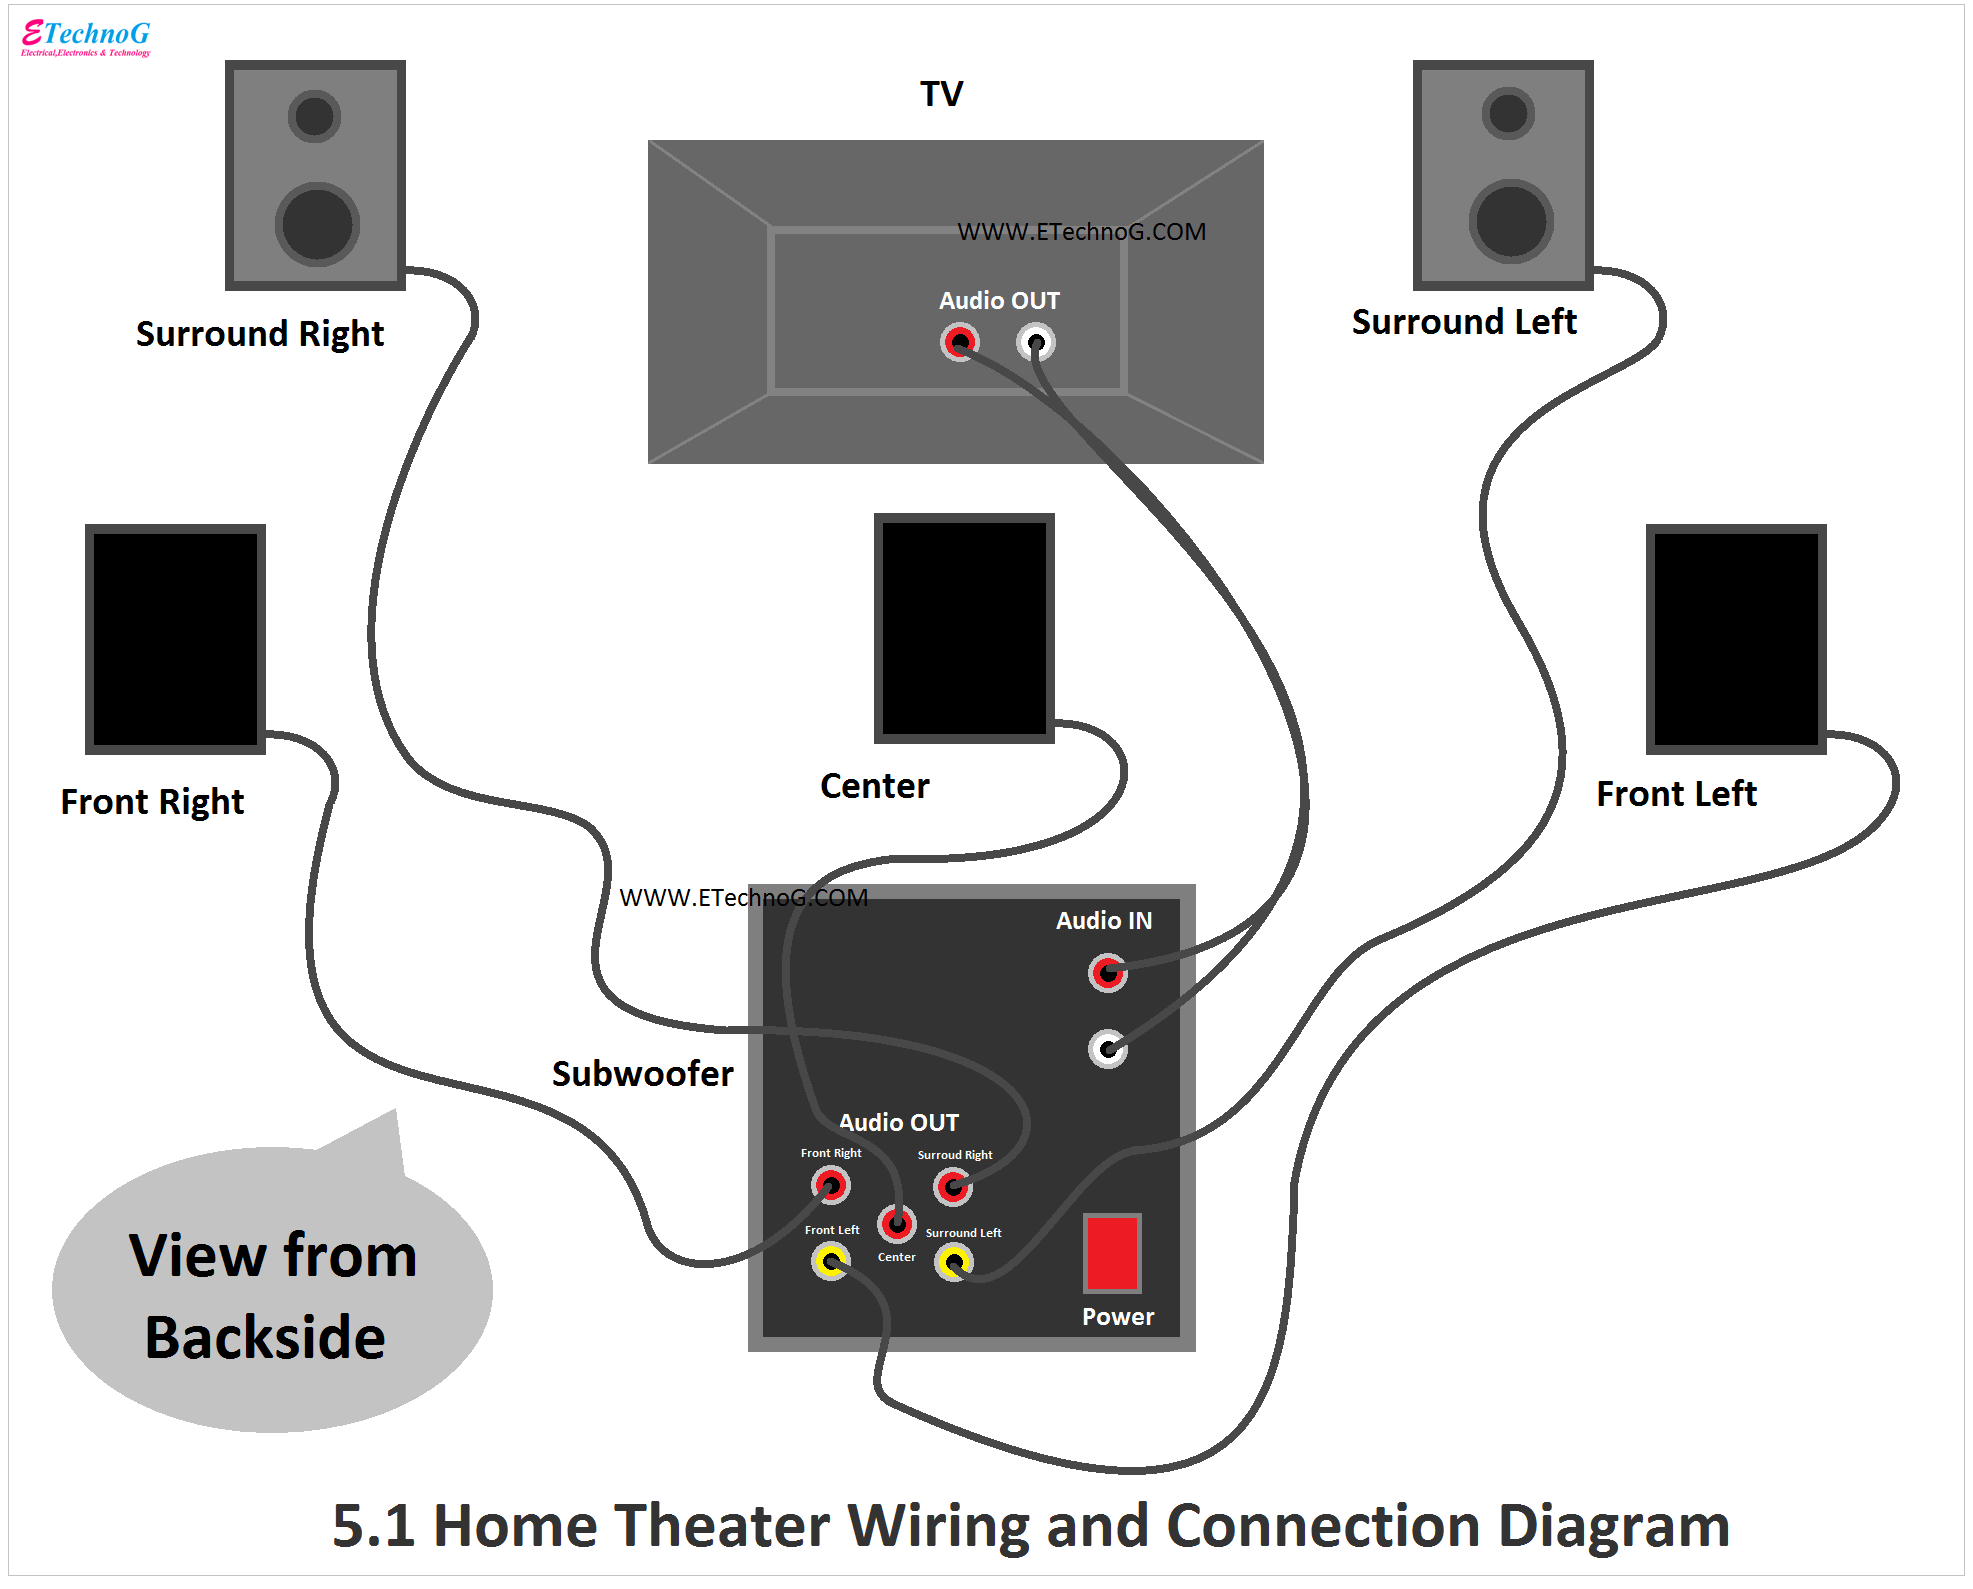 5.1 Home Theater Wiring and Connection Diagram, home theater connection